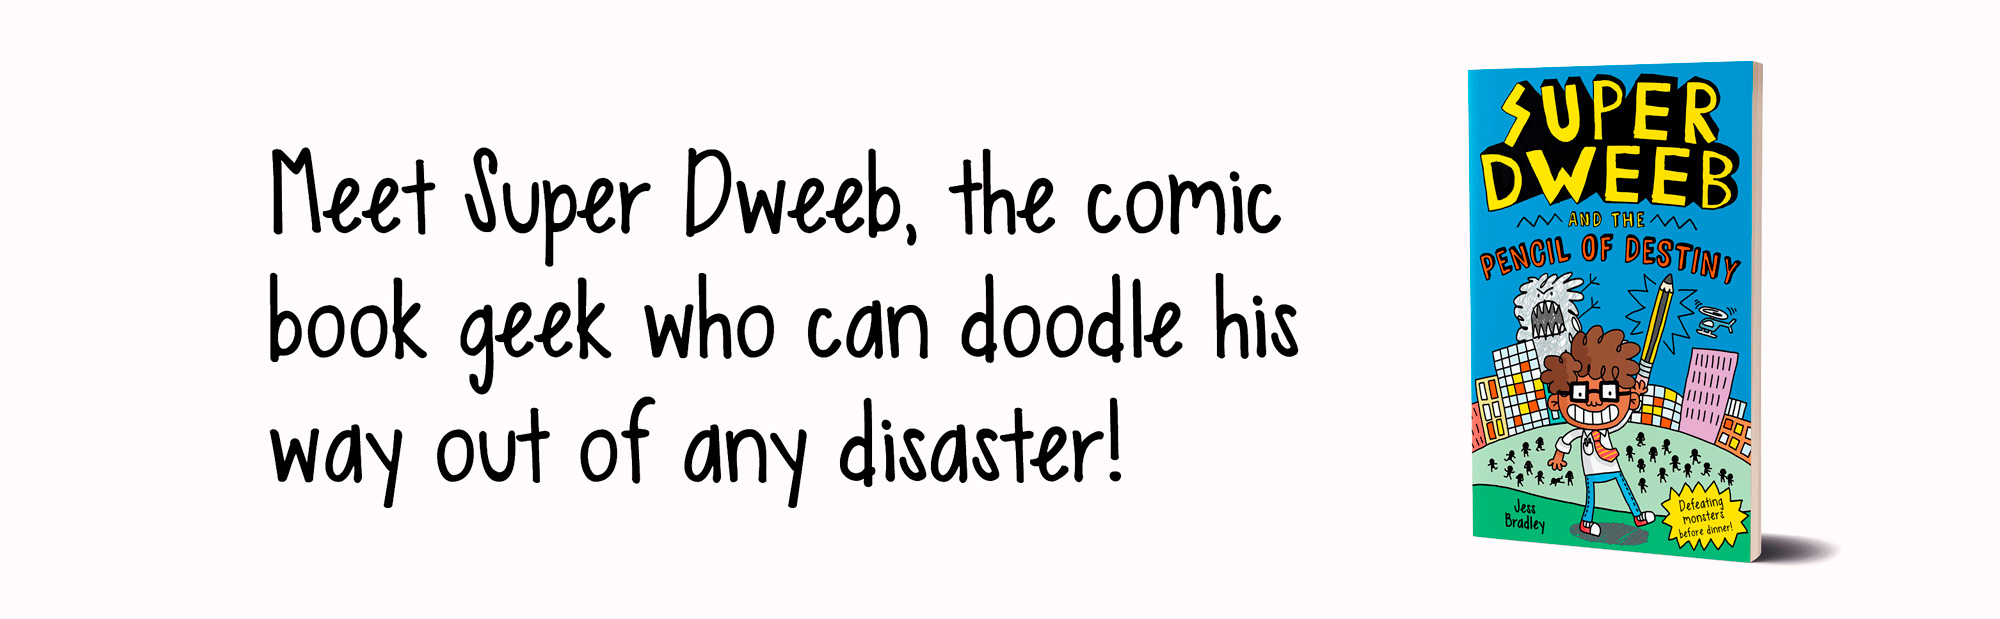 Meet Super Dweeb, the comic book geek who can doodle his way out of any disaster!